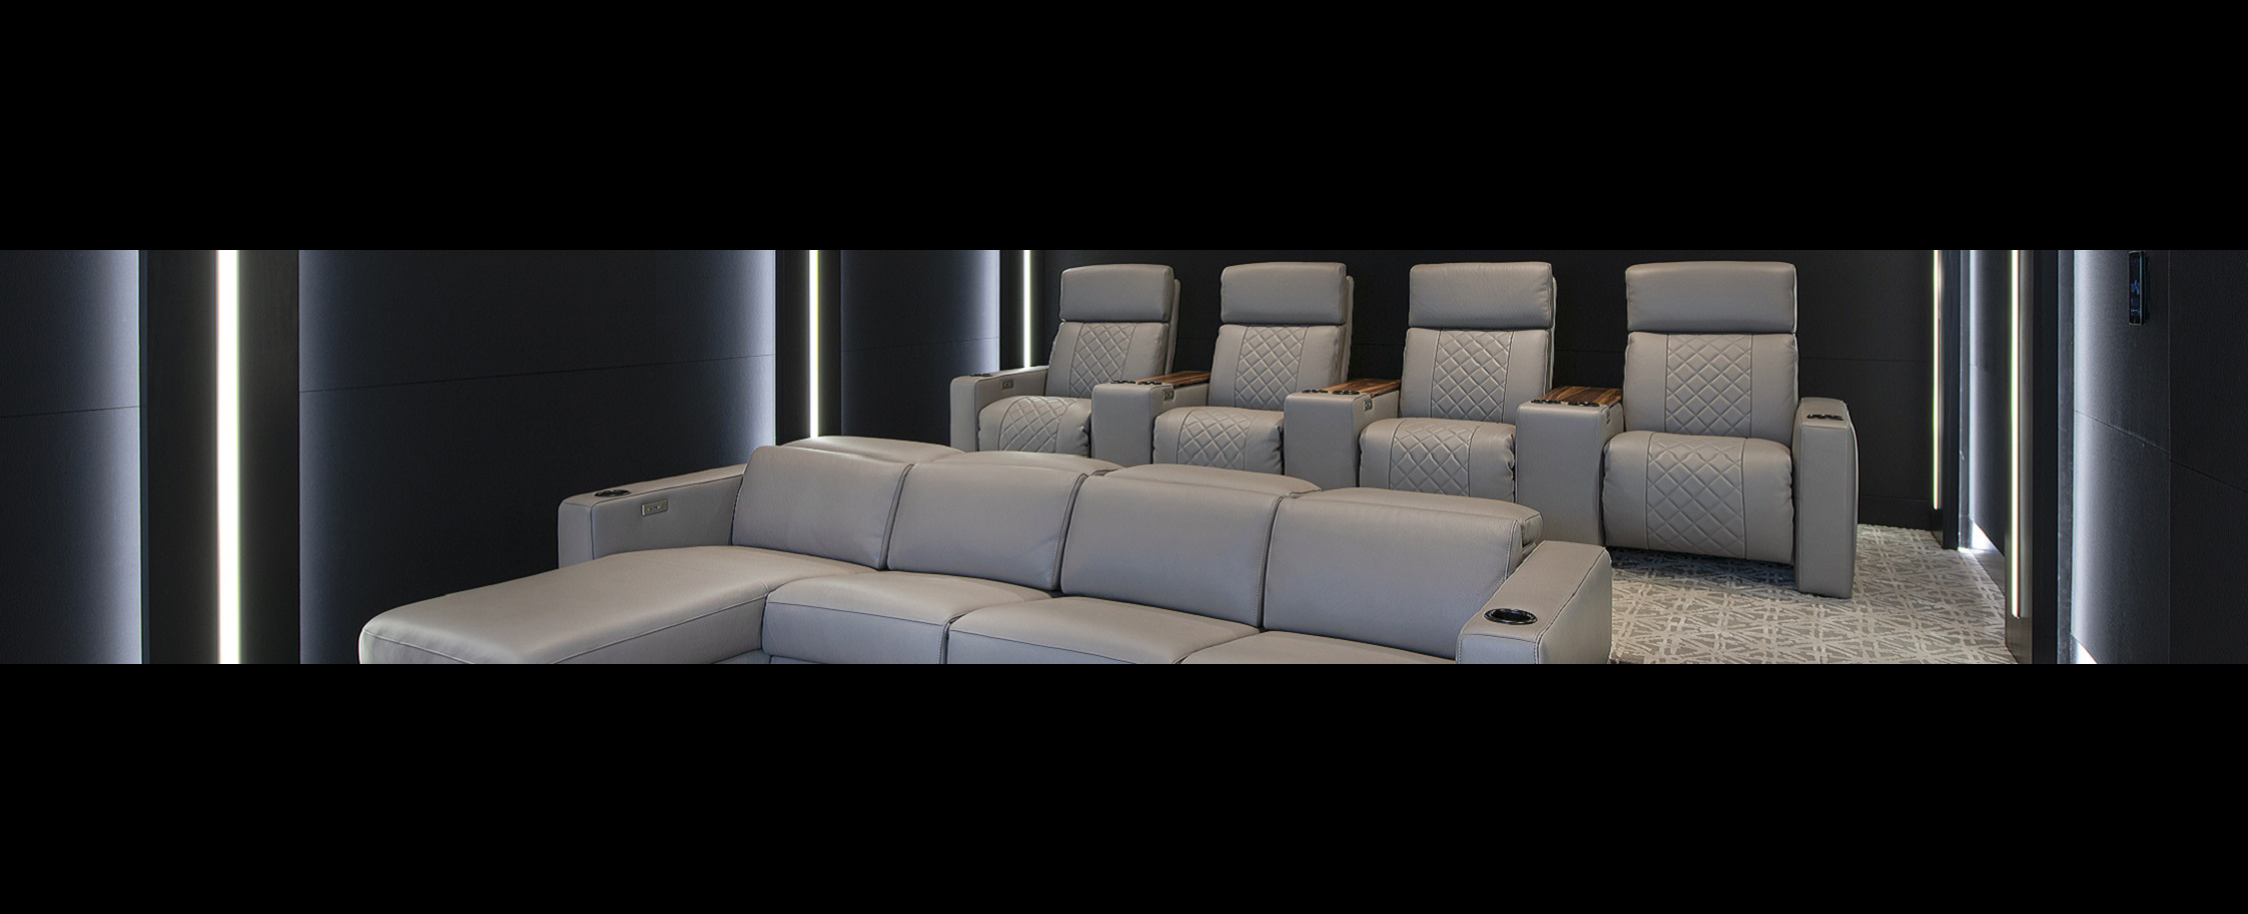 CinemaTech - Home Theater & Media Room Furniture